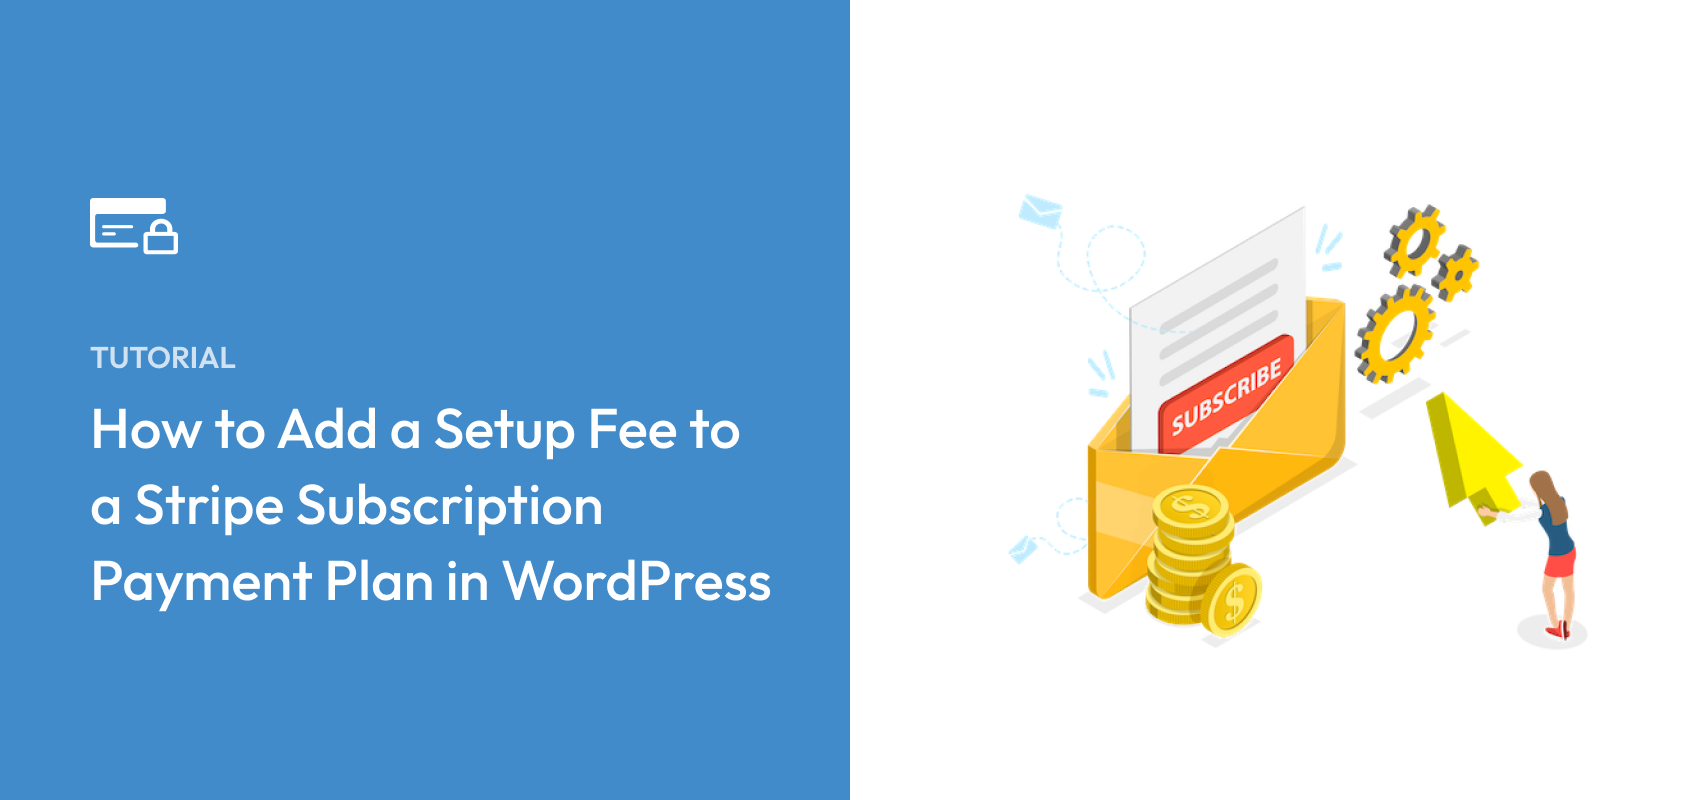 How to Add a Setup Fee to a Stripe Subscription Payment Plan in WordPress